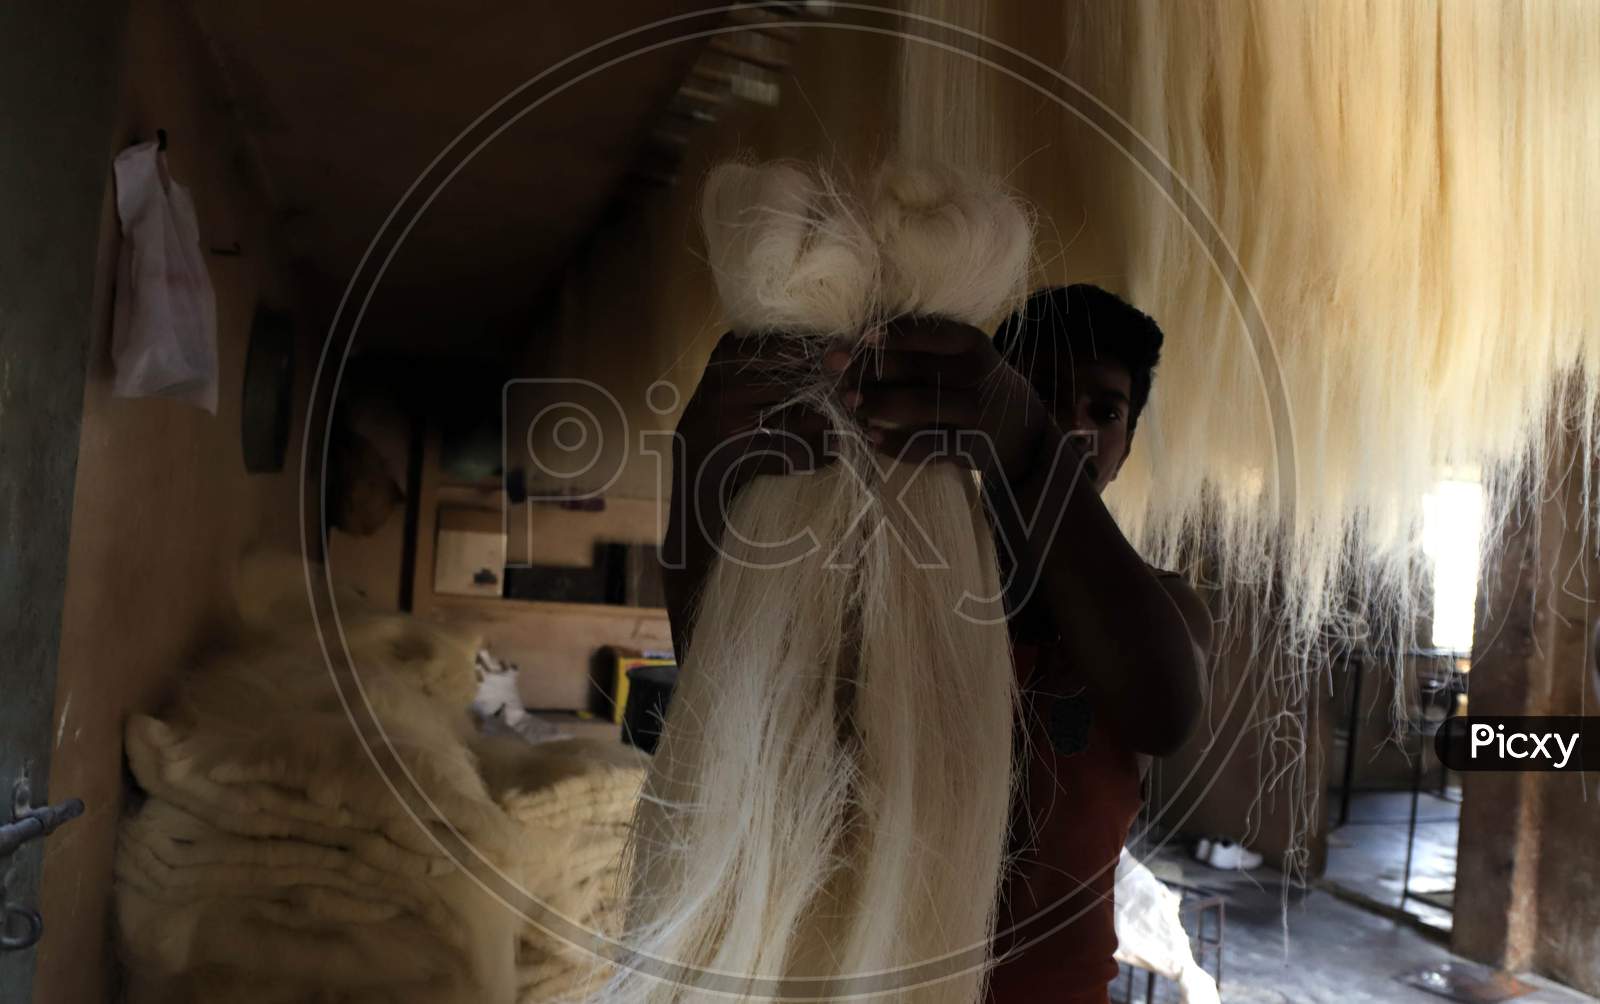 A man carries strands of vermicelli, a specialty ate during the holy month of Ramadan, to dry it at a factory during a nationwide lockdown to slow the spreading of the coronavirus disease (COVID-19), in Prayagraj, April 28, 2020.